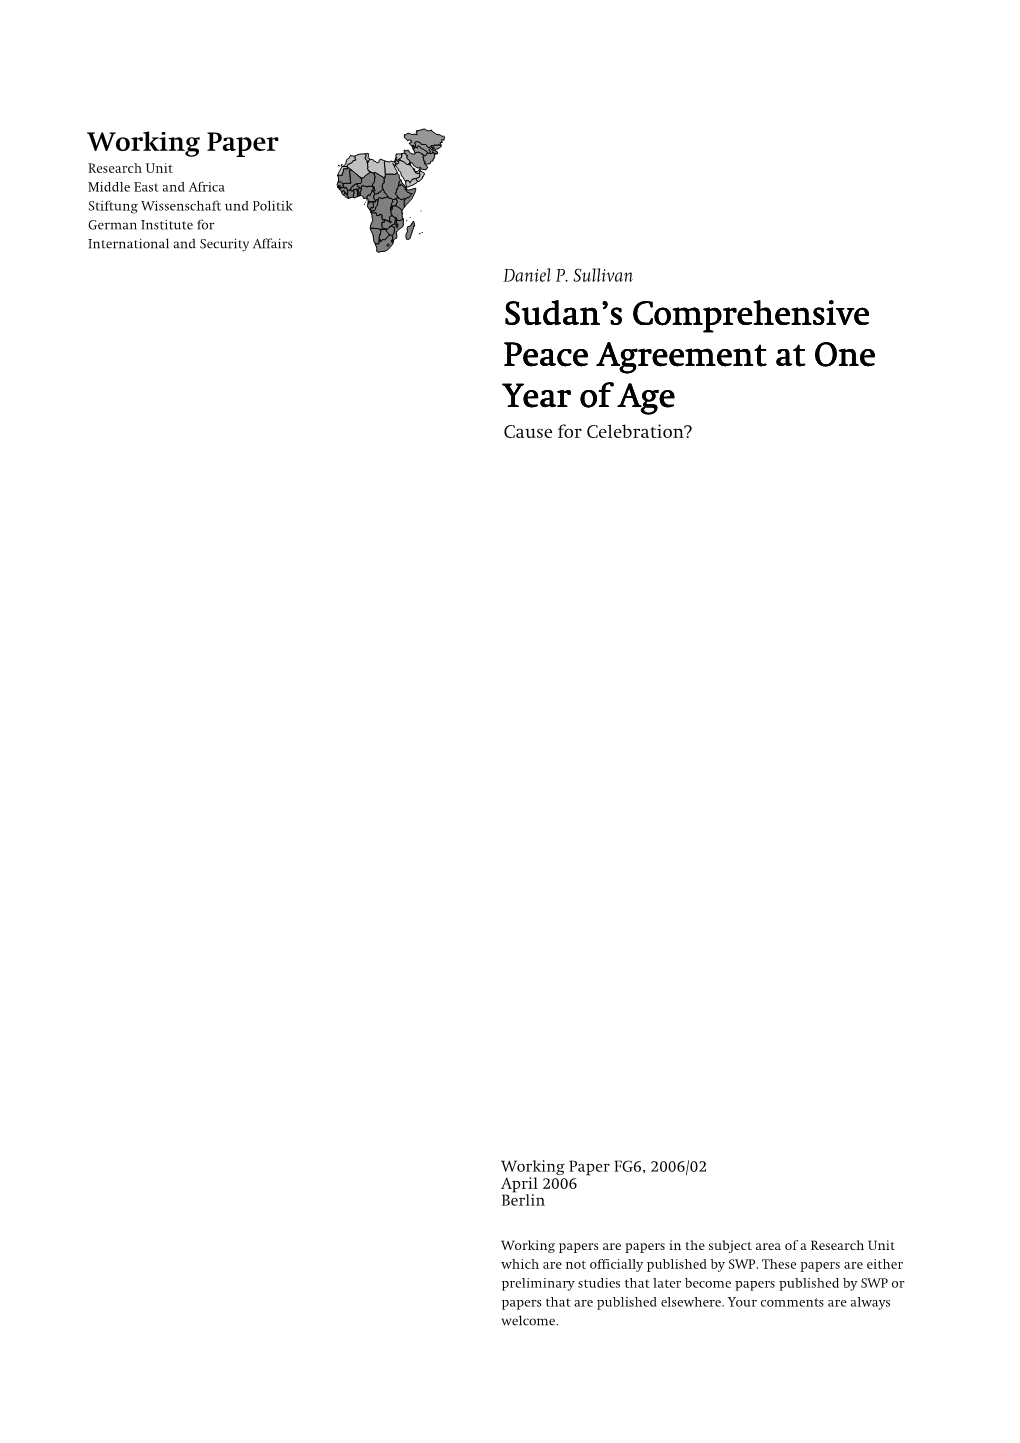 Sudan's Comprehensive Peace Agreement at One Year Of